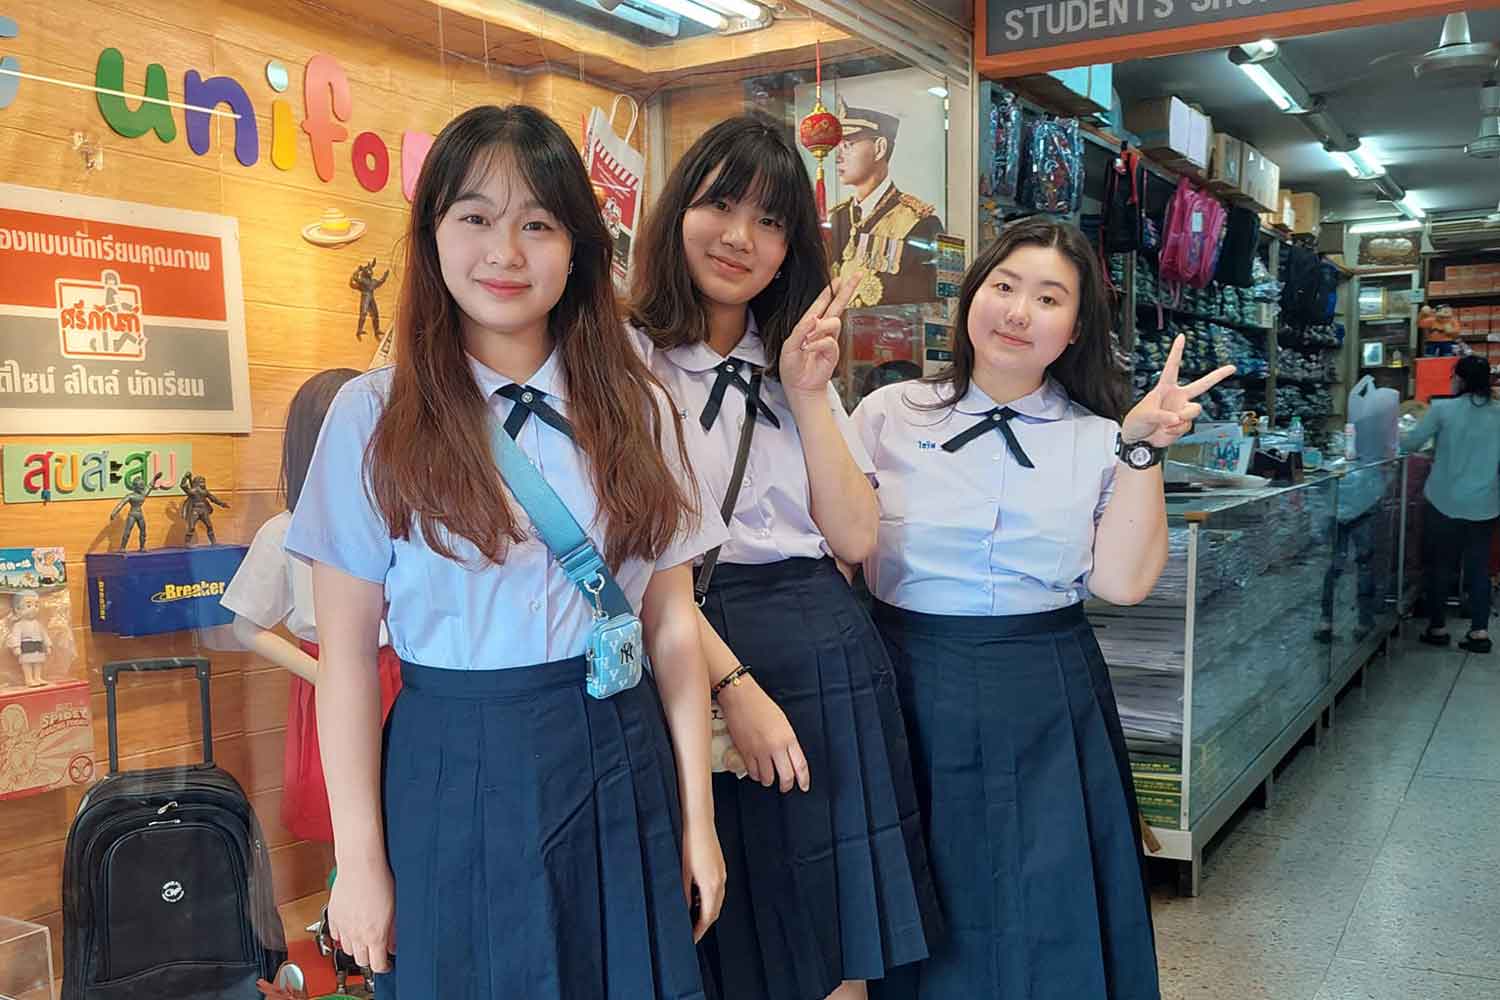 Chinese visitors model Thai student uniforms at the Sriphan shop in Bangkok. Store management posted the picture on its Facebook page last month and thanked the tourists for buying student uniforms there.